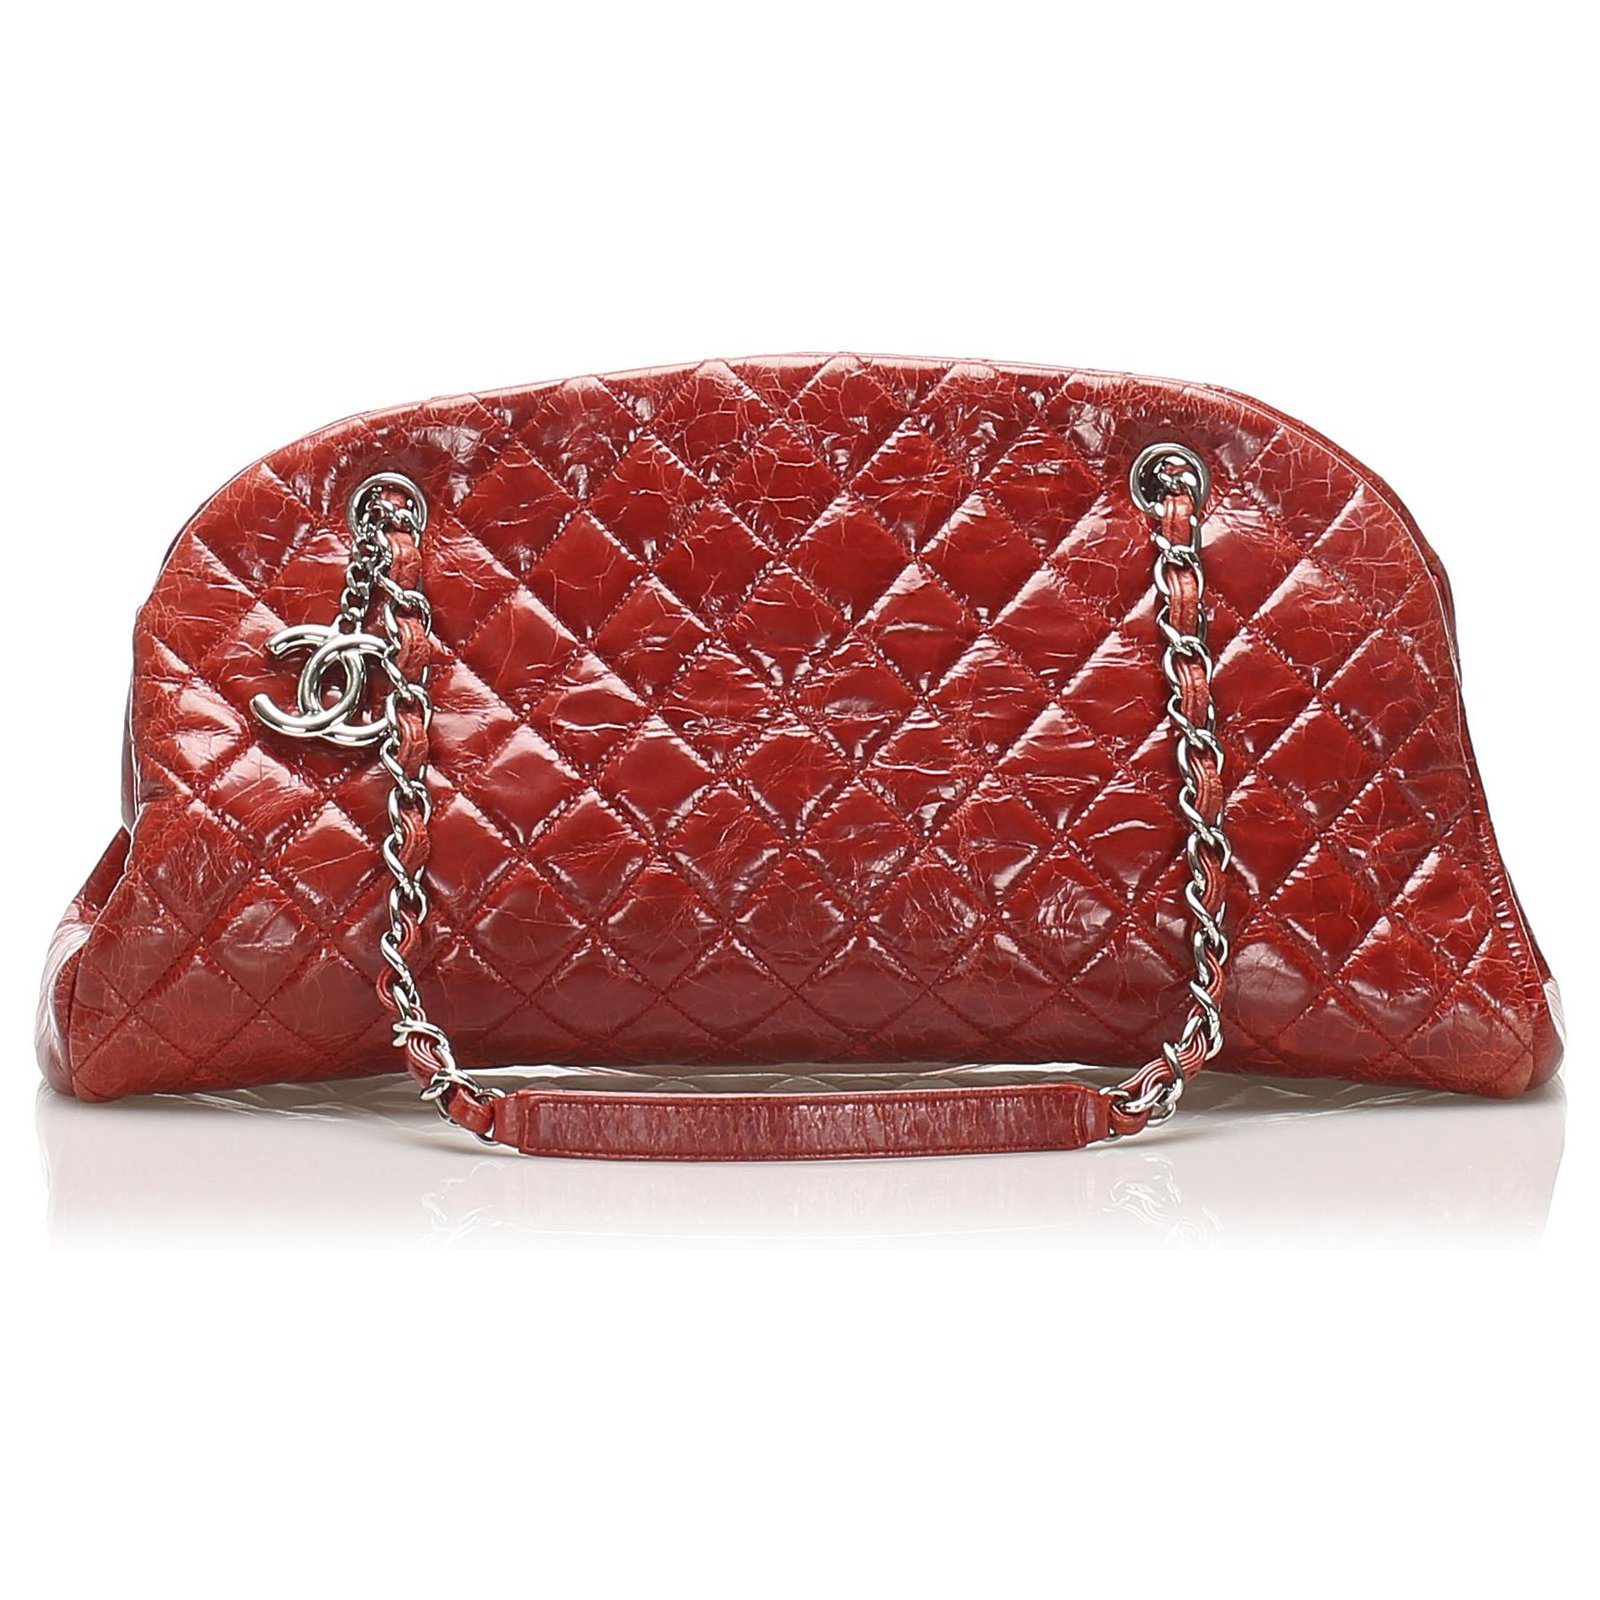 Chanel Red Mademoiselle Bowling Bag Leather Patent leather ref